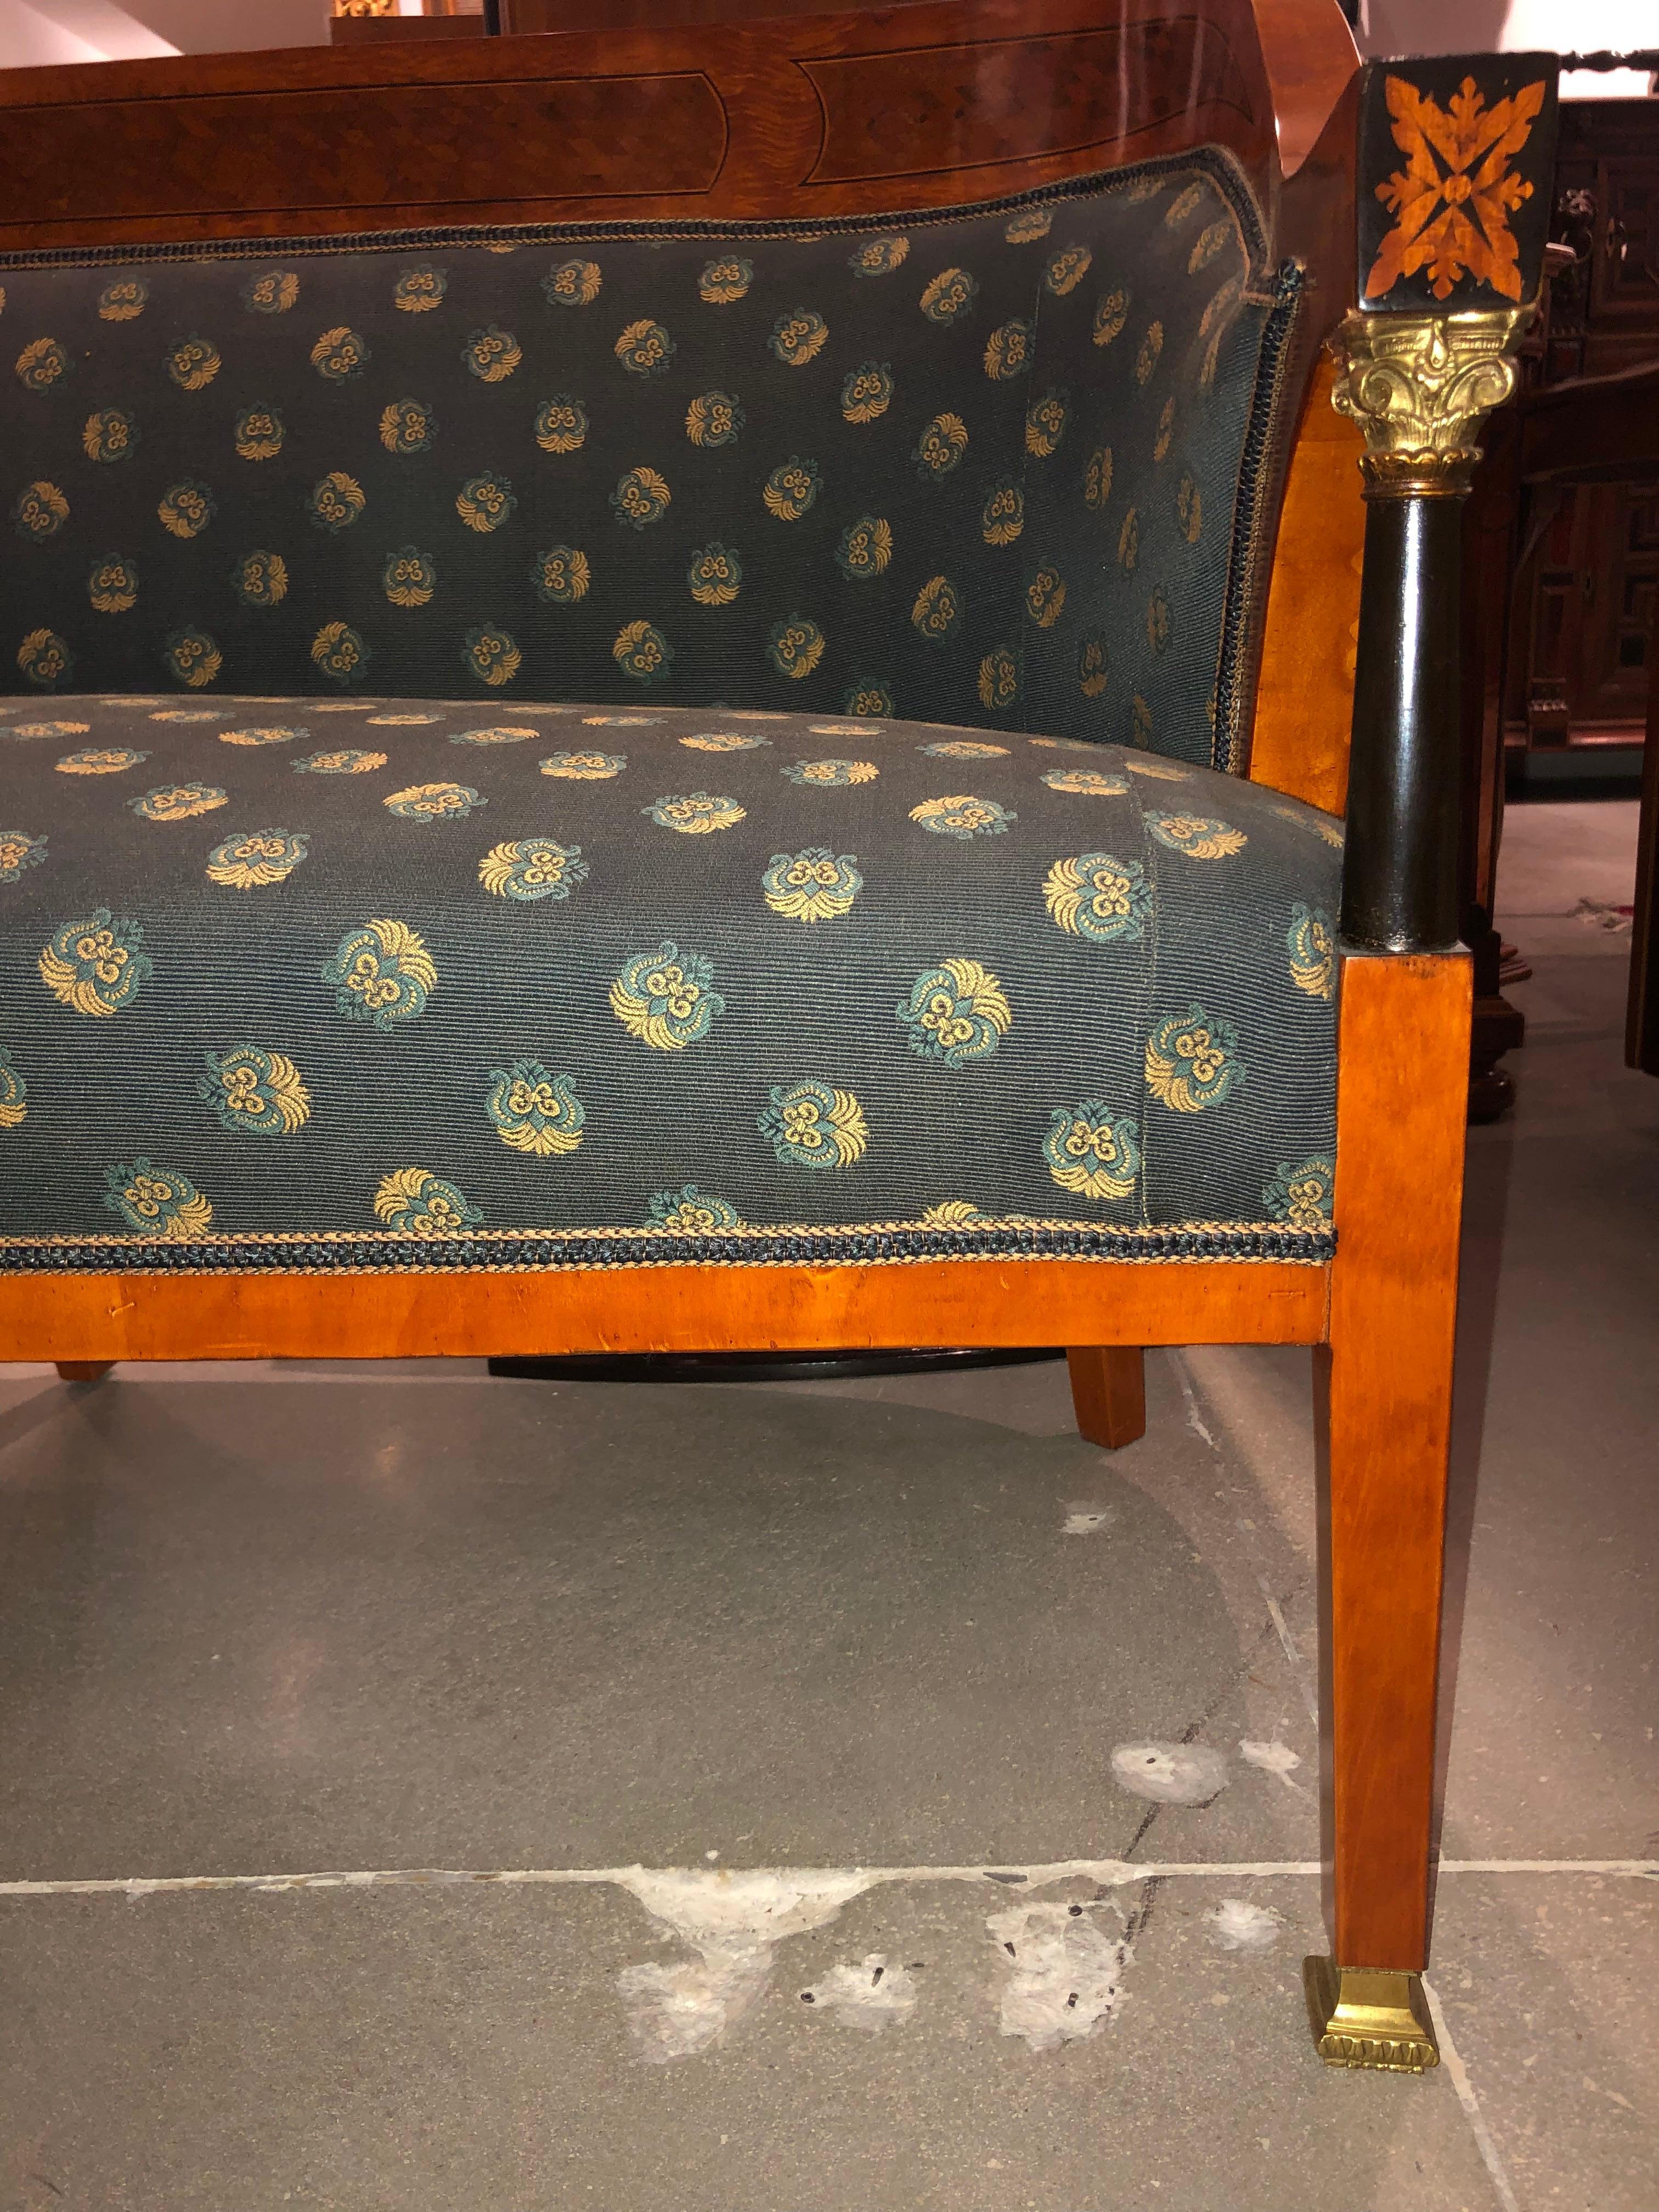 Walnut, rootwood and ebony with gilt bronze fittings. Slate blue upholstery with gold/teal floral pattern, circa 1890-1910. Part of a suite with Chairs E3/090-1.